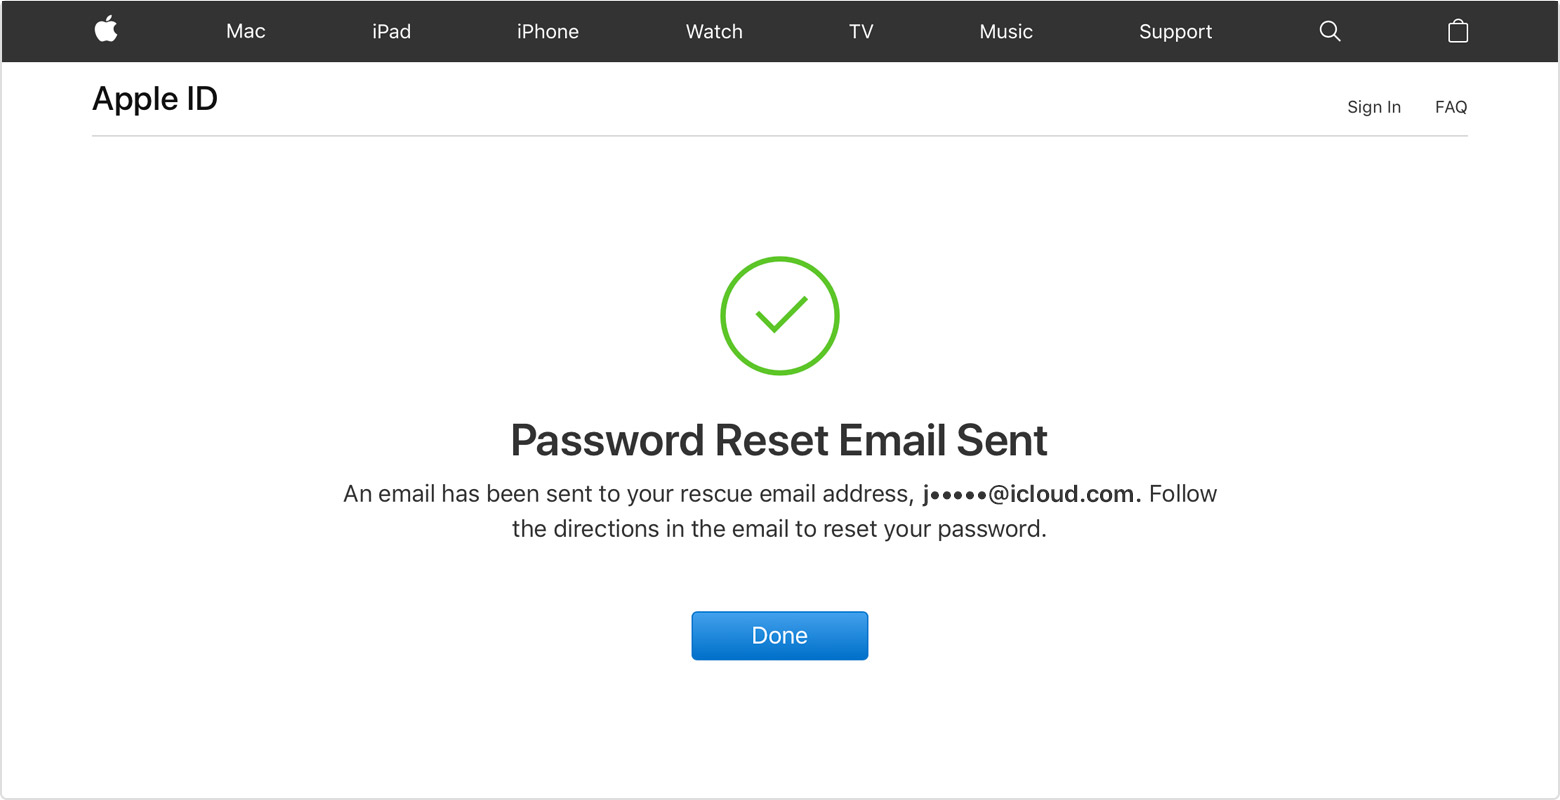 Apple ID screen showing Password Reset Email Sent